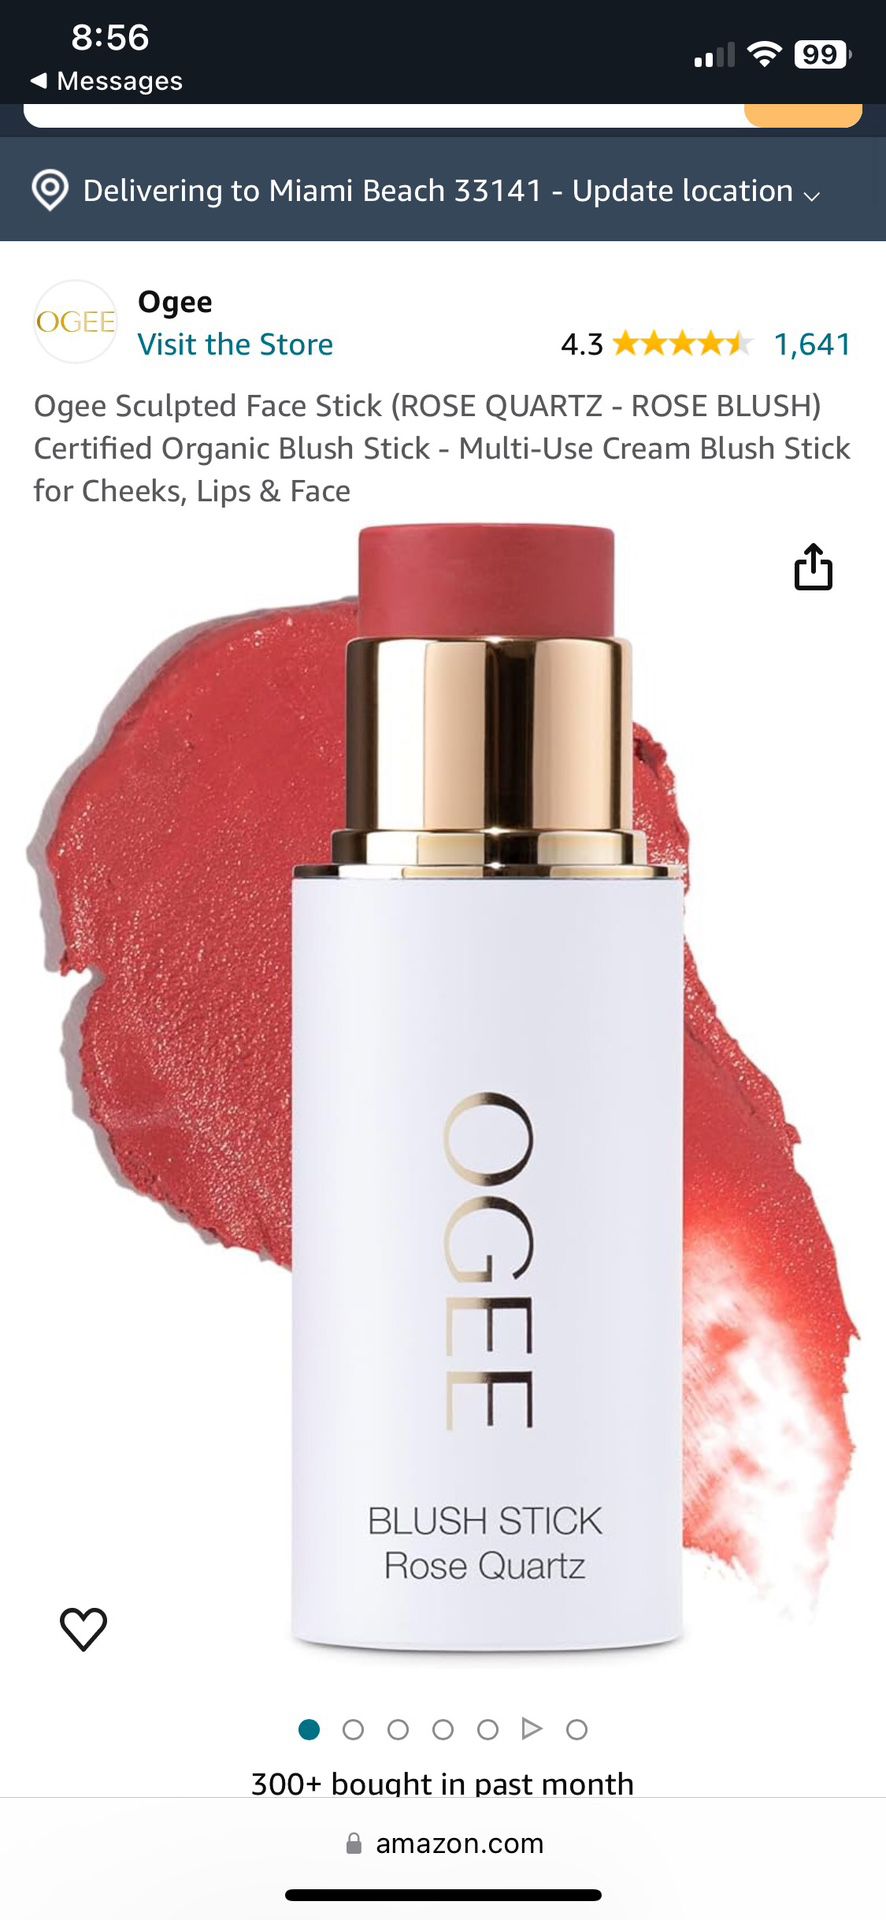 OGEE Sculpted  Certified Organic Blush Stick Rose Quartz Multi Use For Chicks Lips & Face 